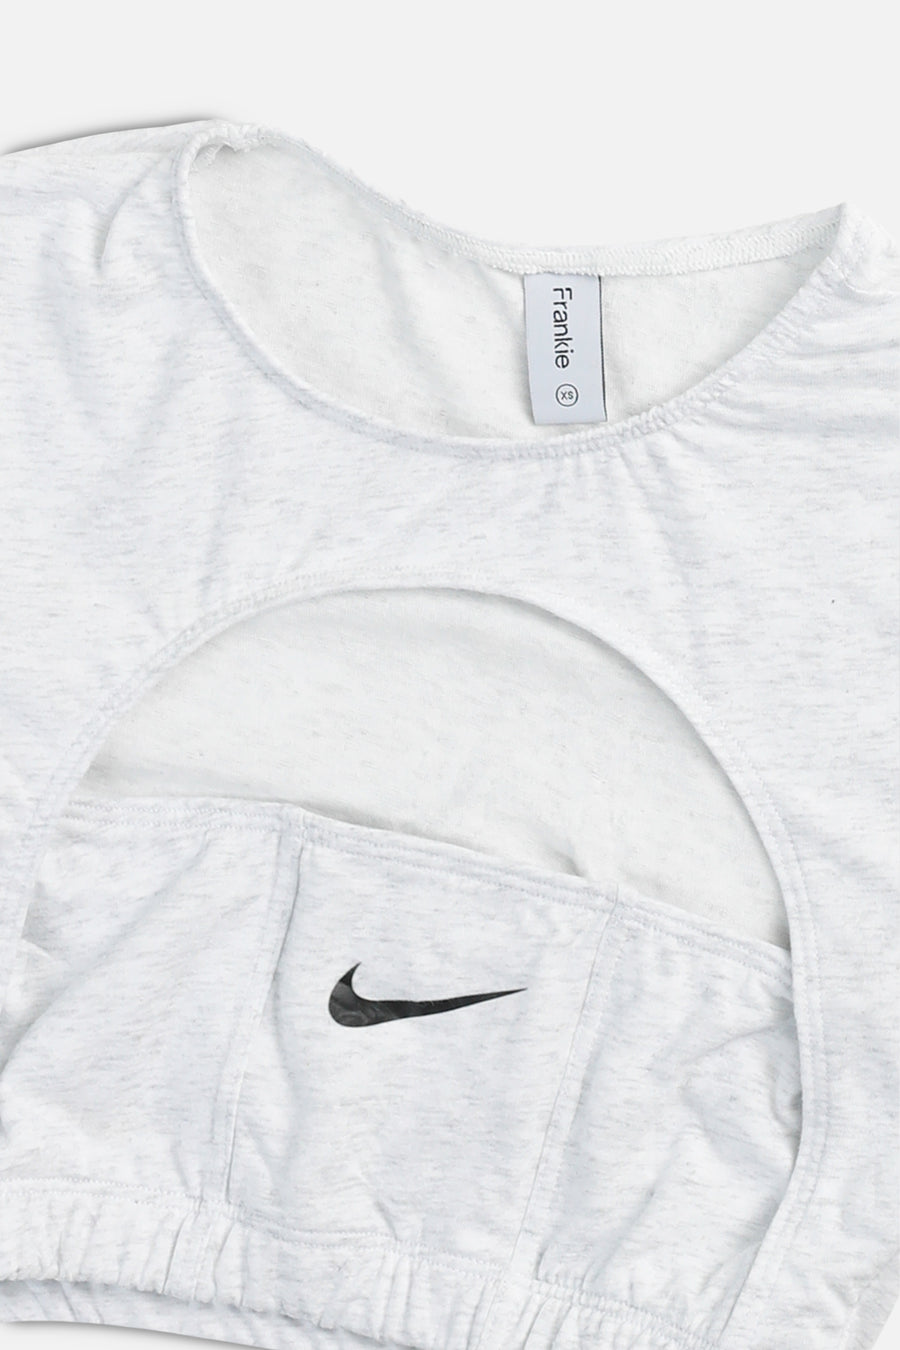 Rework Nike Cut Out Tee - XS, S